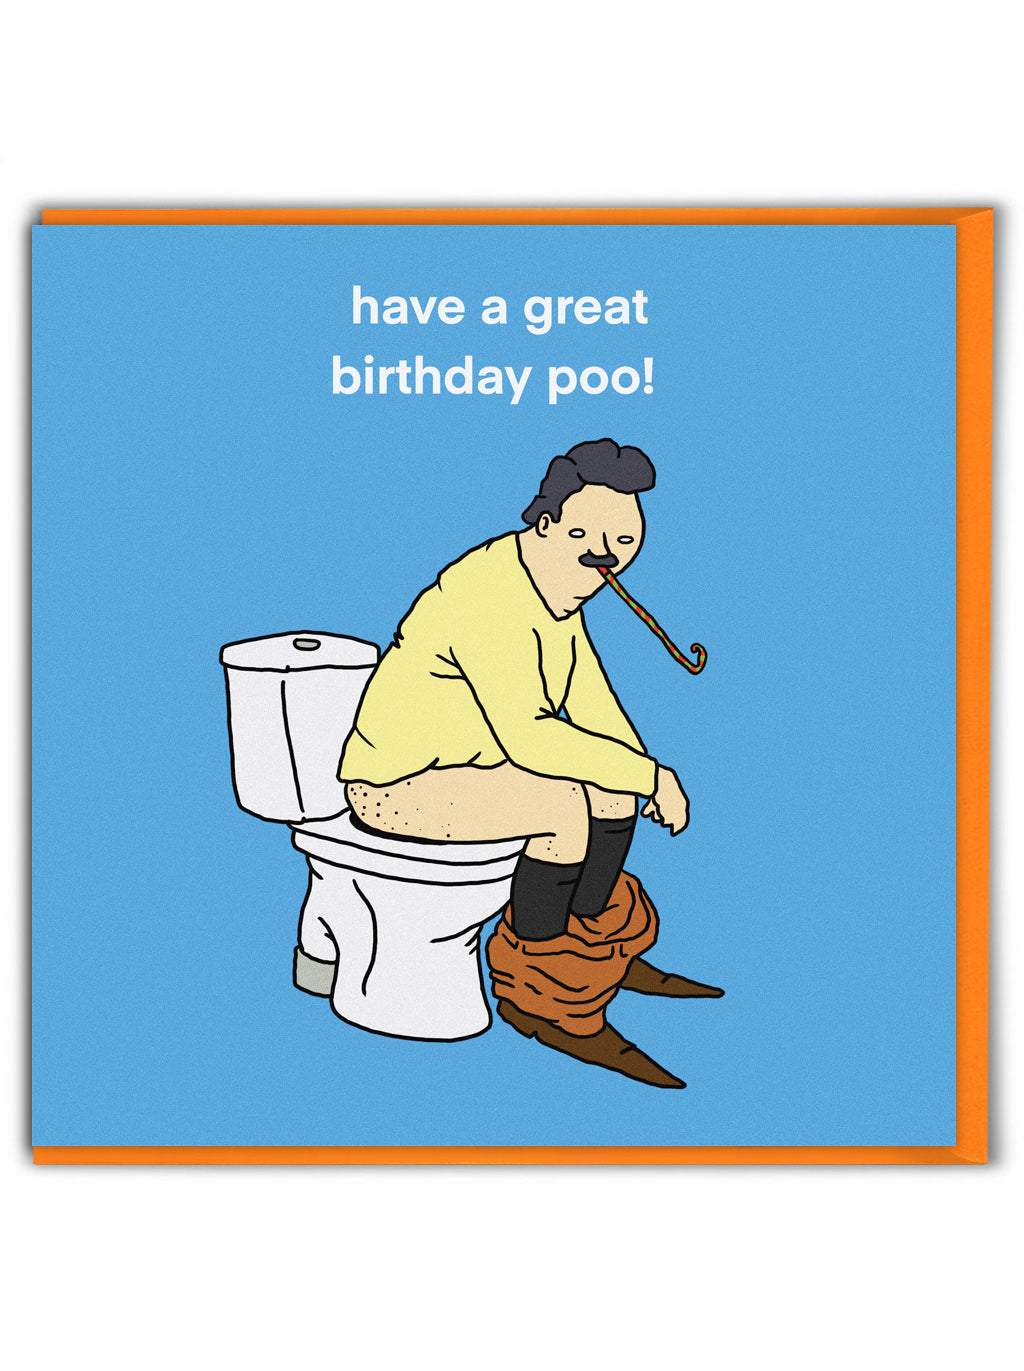 A greetings card with a sky blue background and the illustration of a white man sitting on the toilet blowing a party blower. the words above him read &#39;have a great birthday poo!&#39;